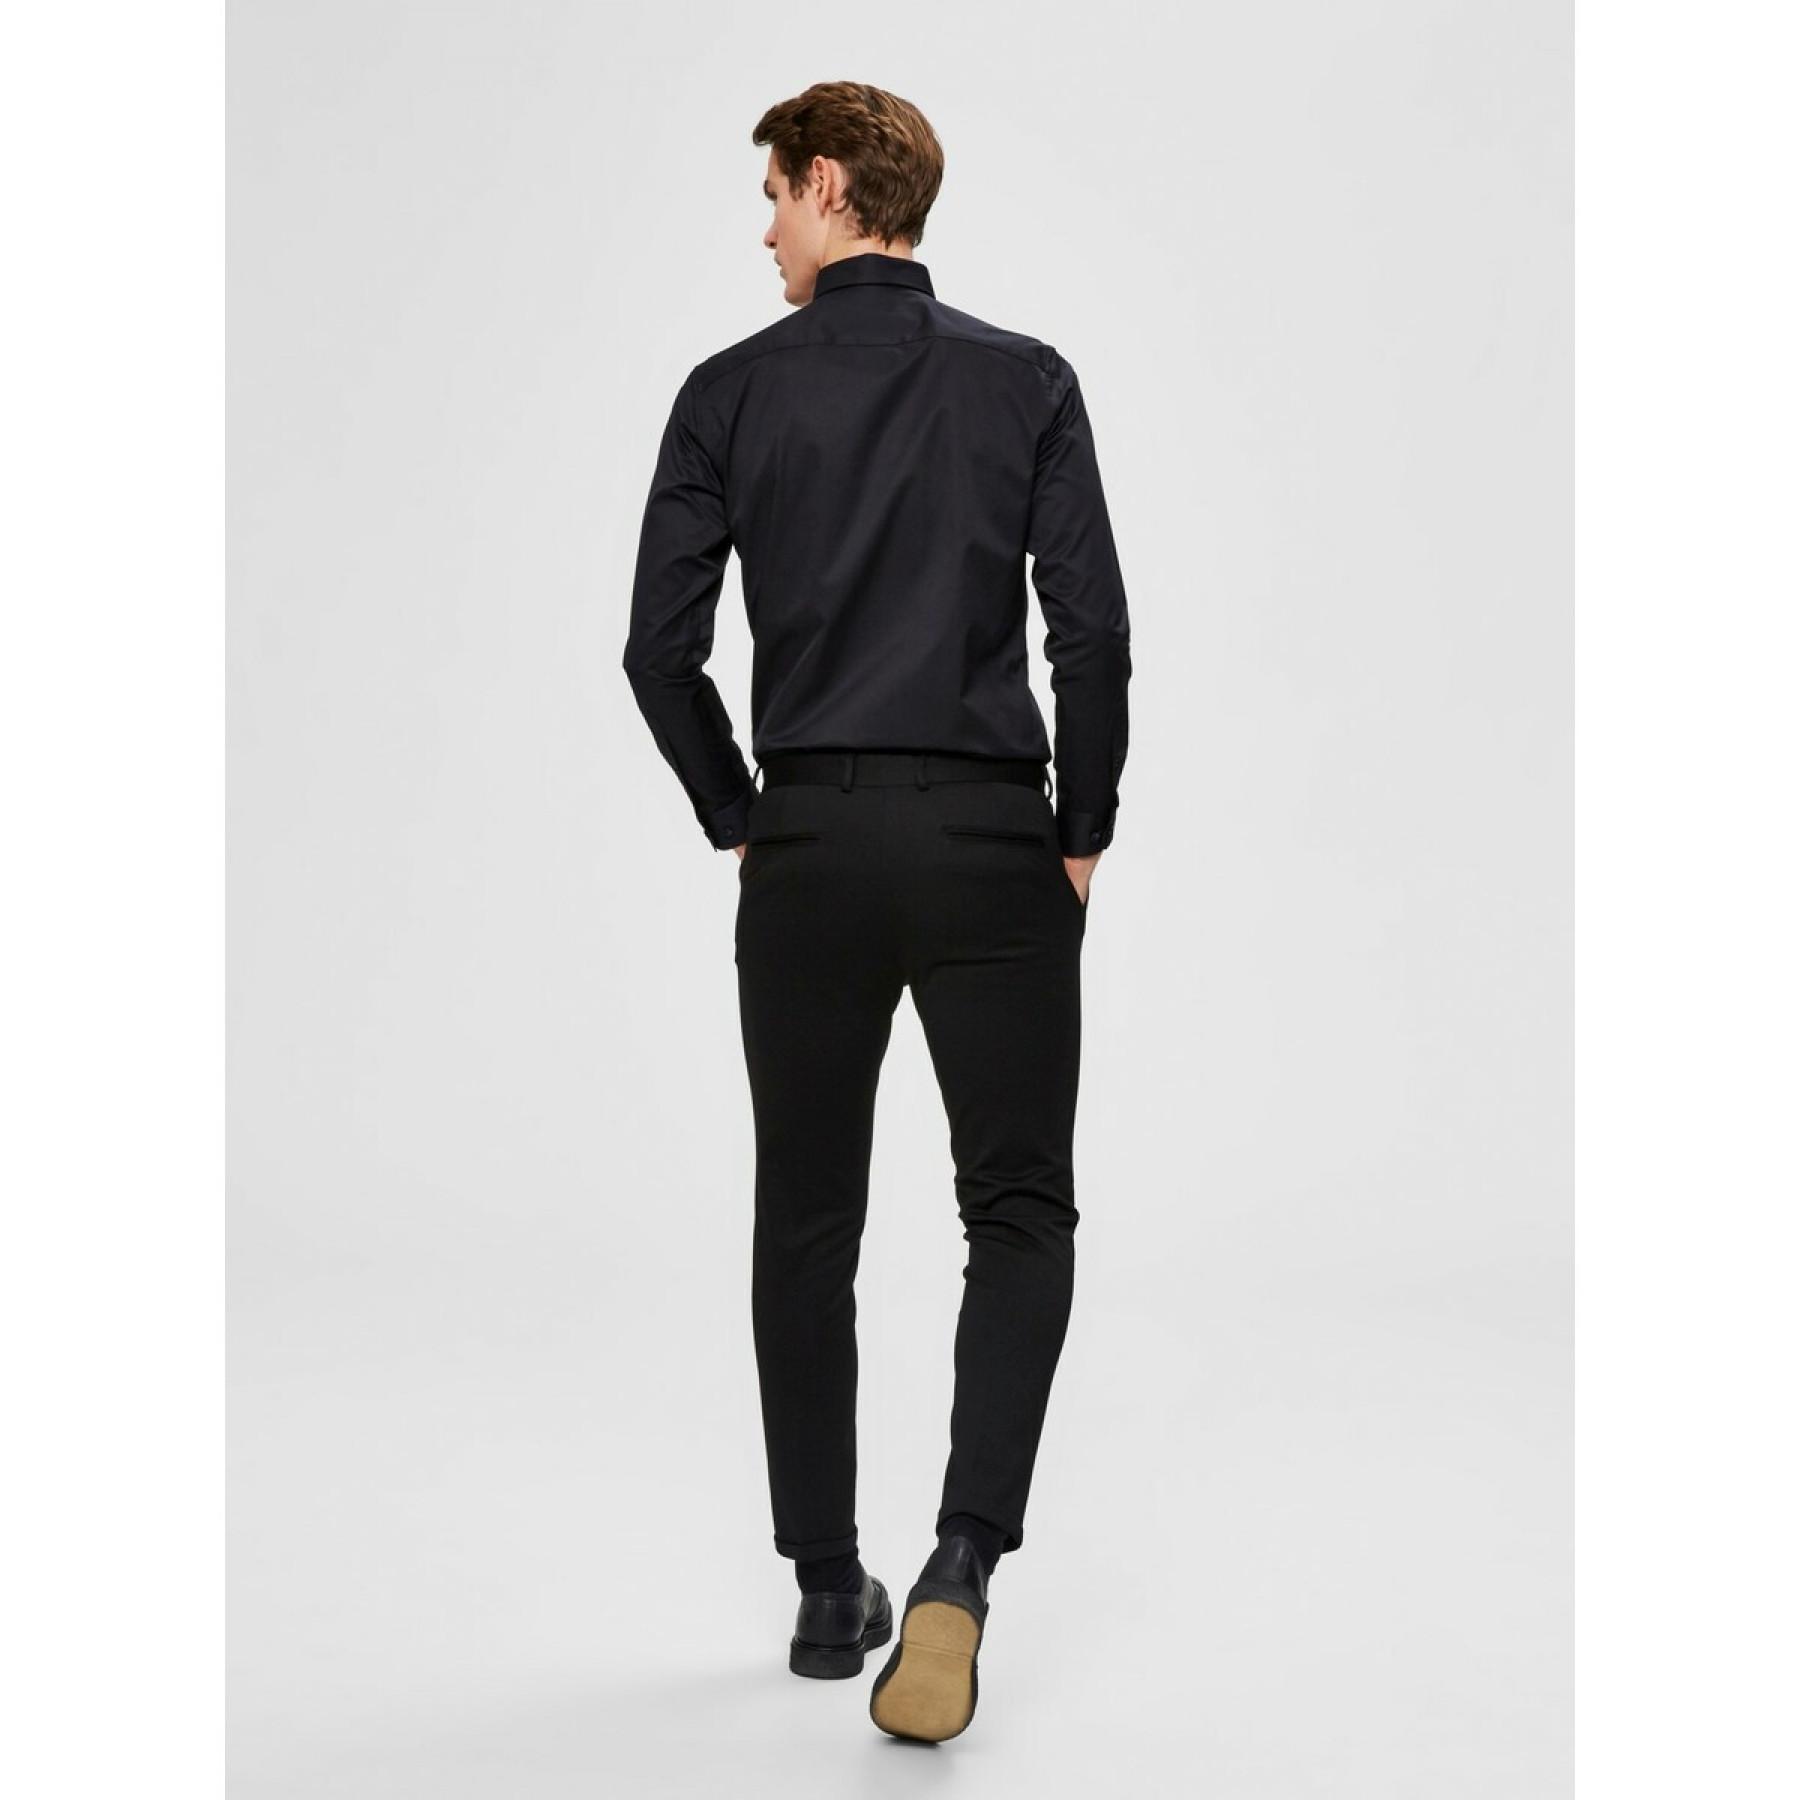 Hemd Selected Sel-pelle manches longues slim